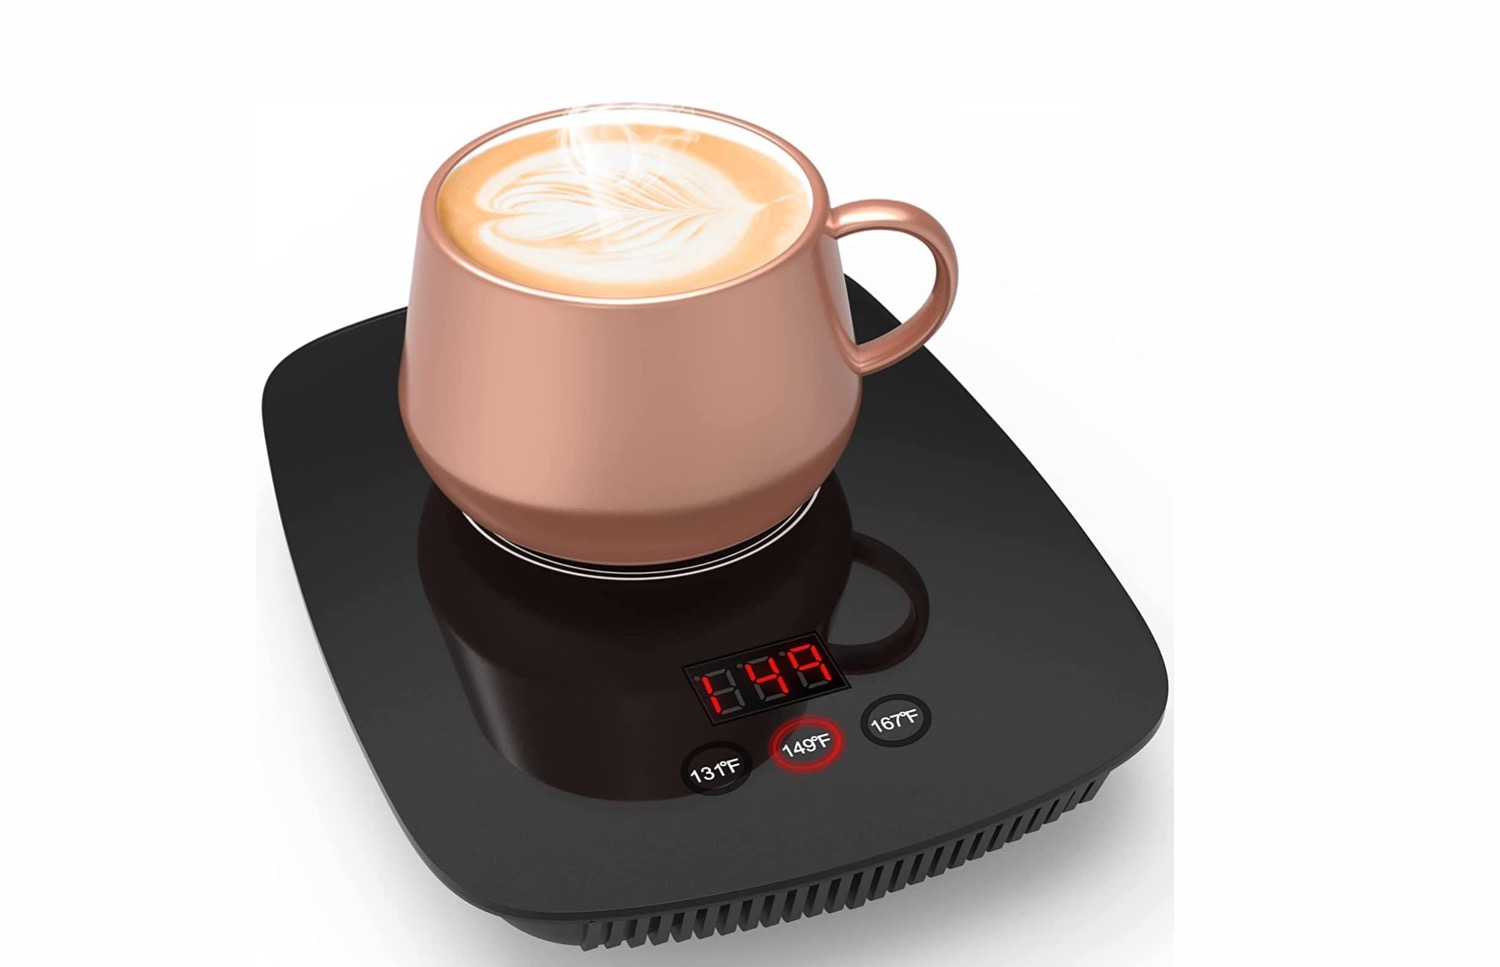 VOBAGA Cup Warmer review - Keep your cuppa coffee or tea warmer for longer  - The Gadgeteer